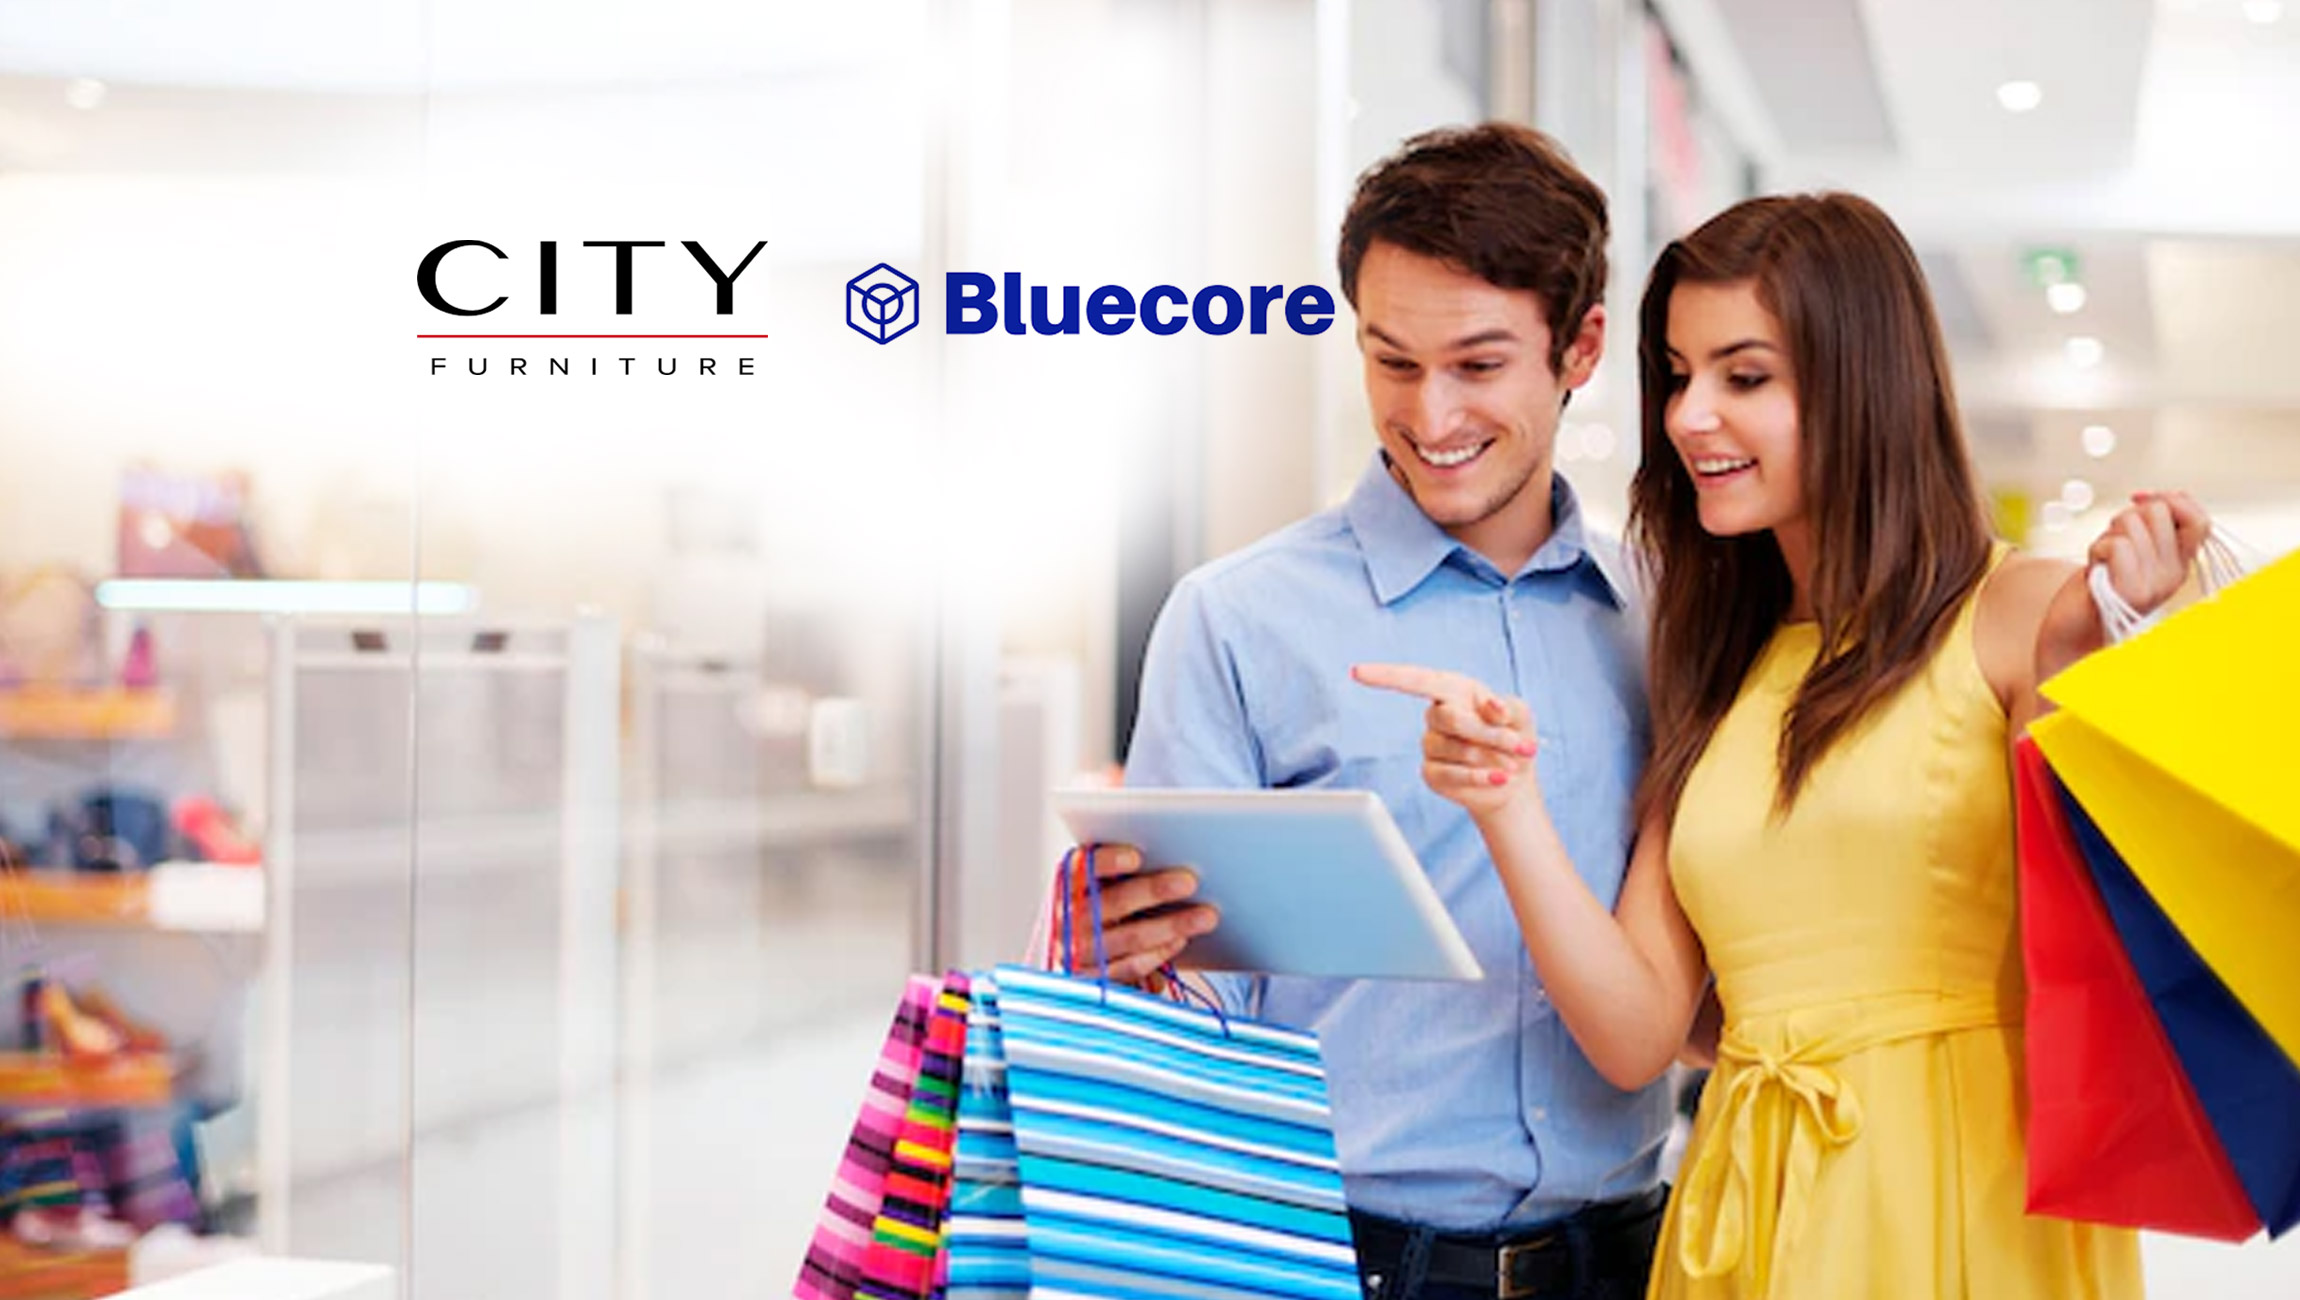 CITY-Furniture-Connects-to-Customers-Digitally-with-Bluecore;-Identifies-330%-More-Shoppers-and-Increases-Repeat-Buyers-by-118%